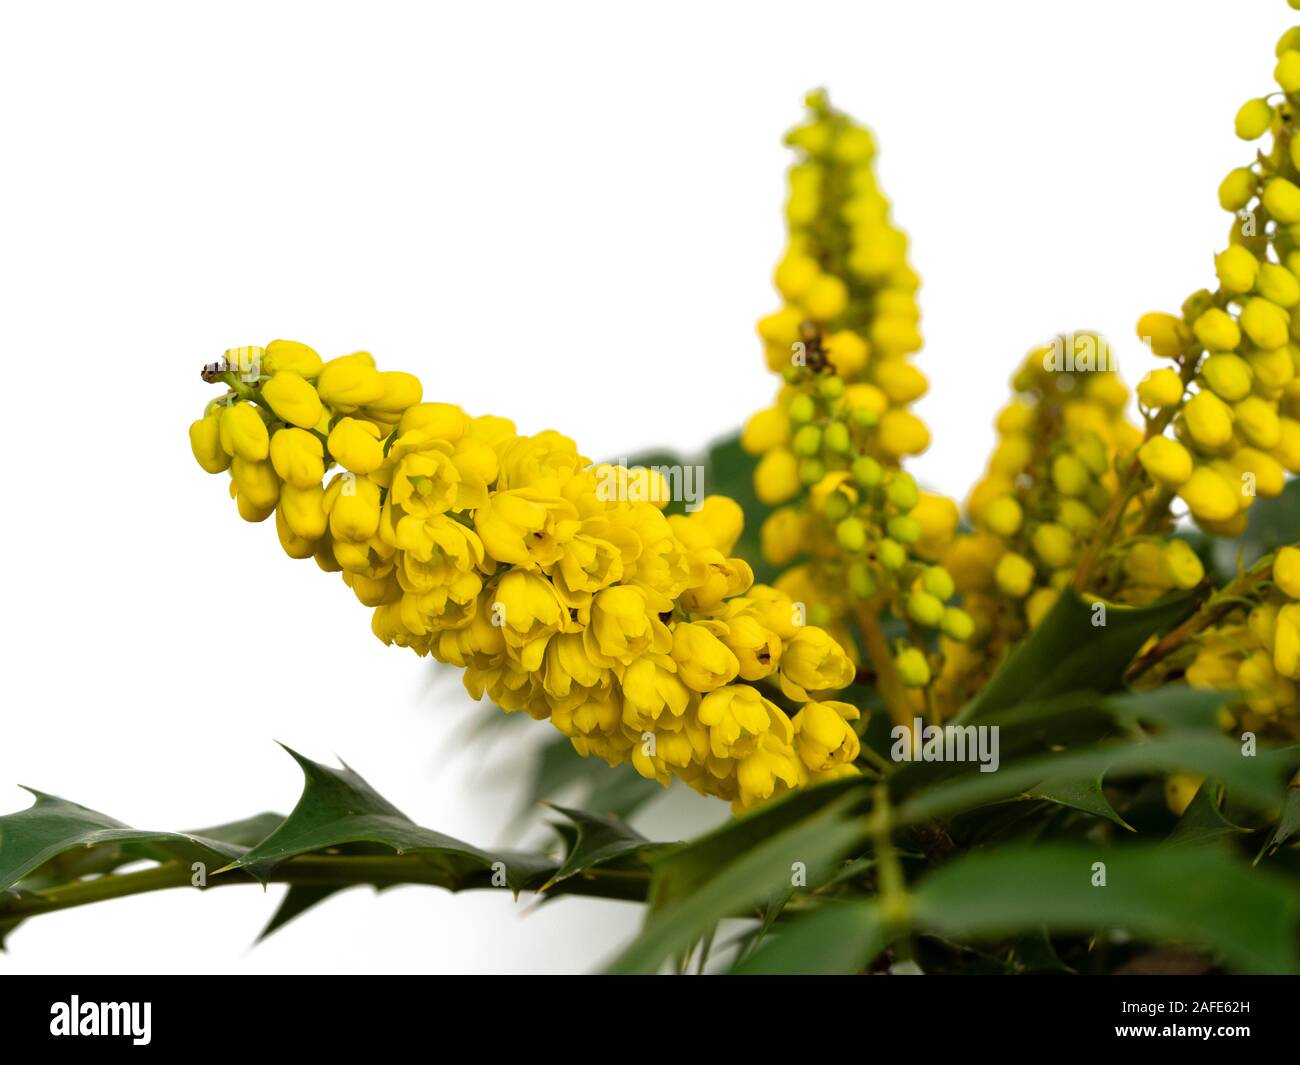 Upright flower spikes of the winter blooming, spiky leavef hardy evergreen shrub, Mahonia x media 'Winter Sun' Stock Photo